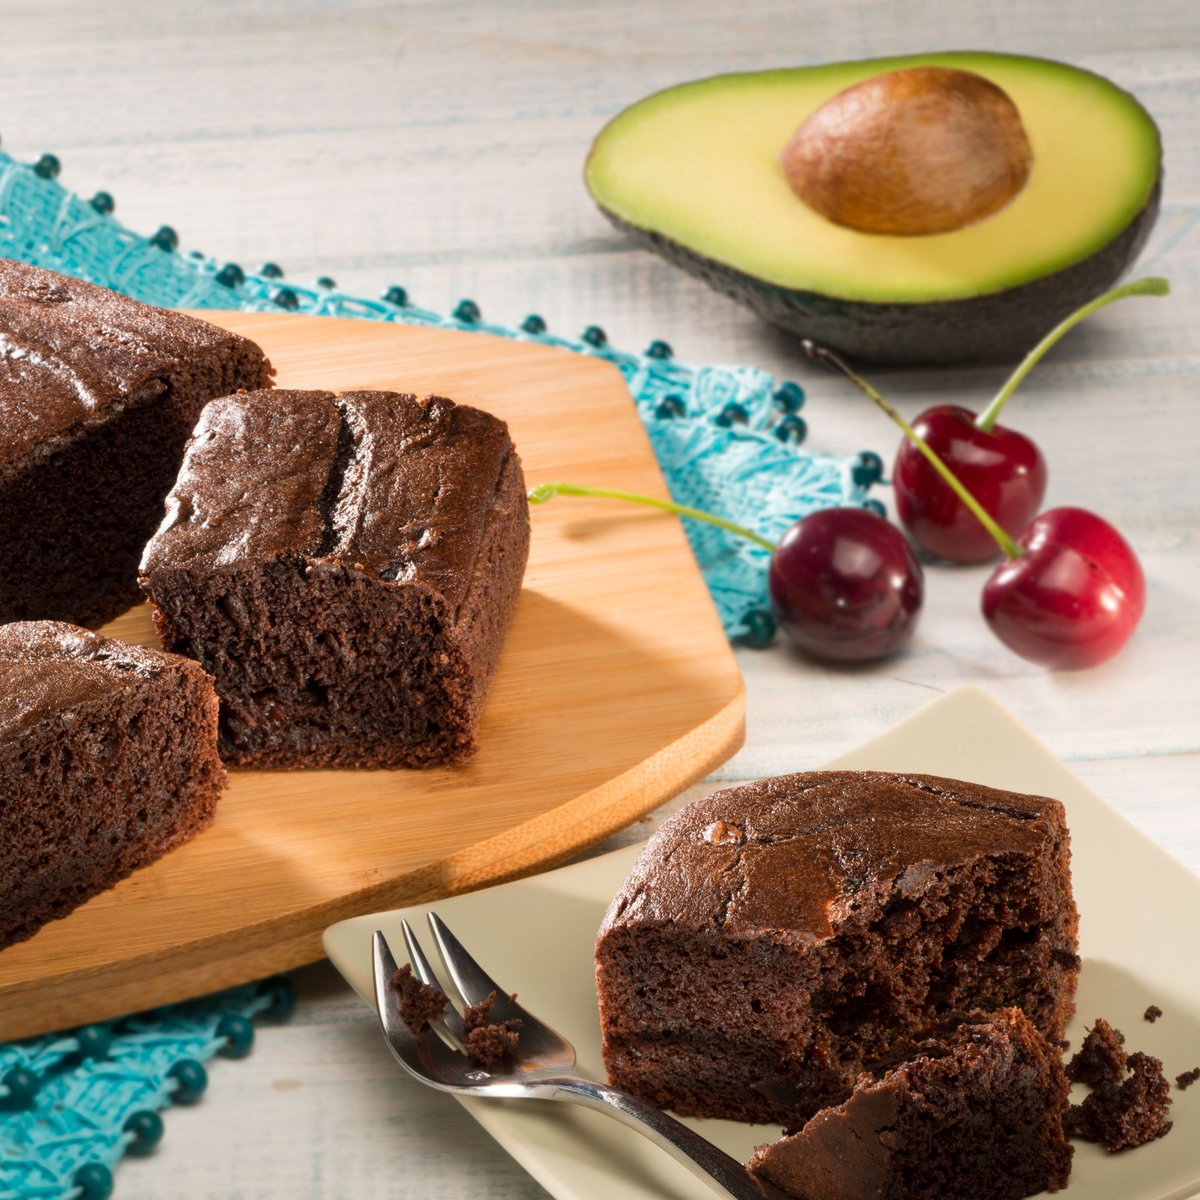 This chocolate, cherry, and avocado fudge cake will for SURE make your Valentine feel allllll the avo-love 😘 Try this recipe and impress your boo: bit.ly/496HBso 💚 #ValentinesDay #ValentinesDateIdeas #PastryRecipe